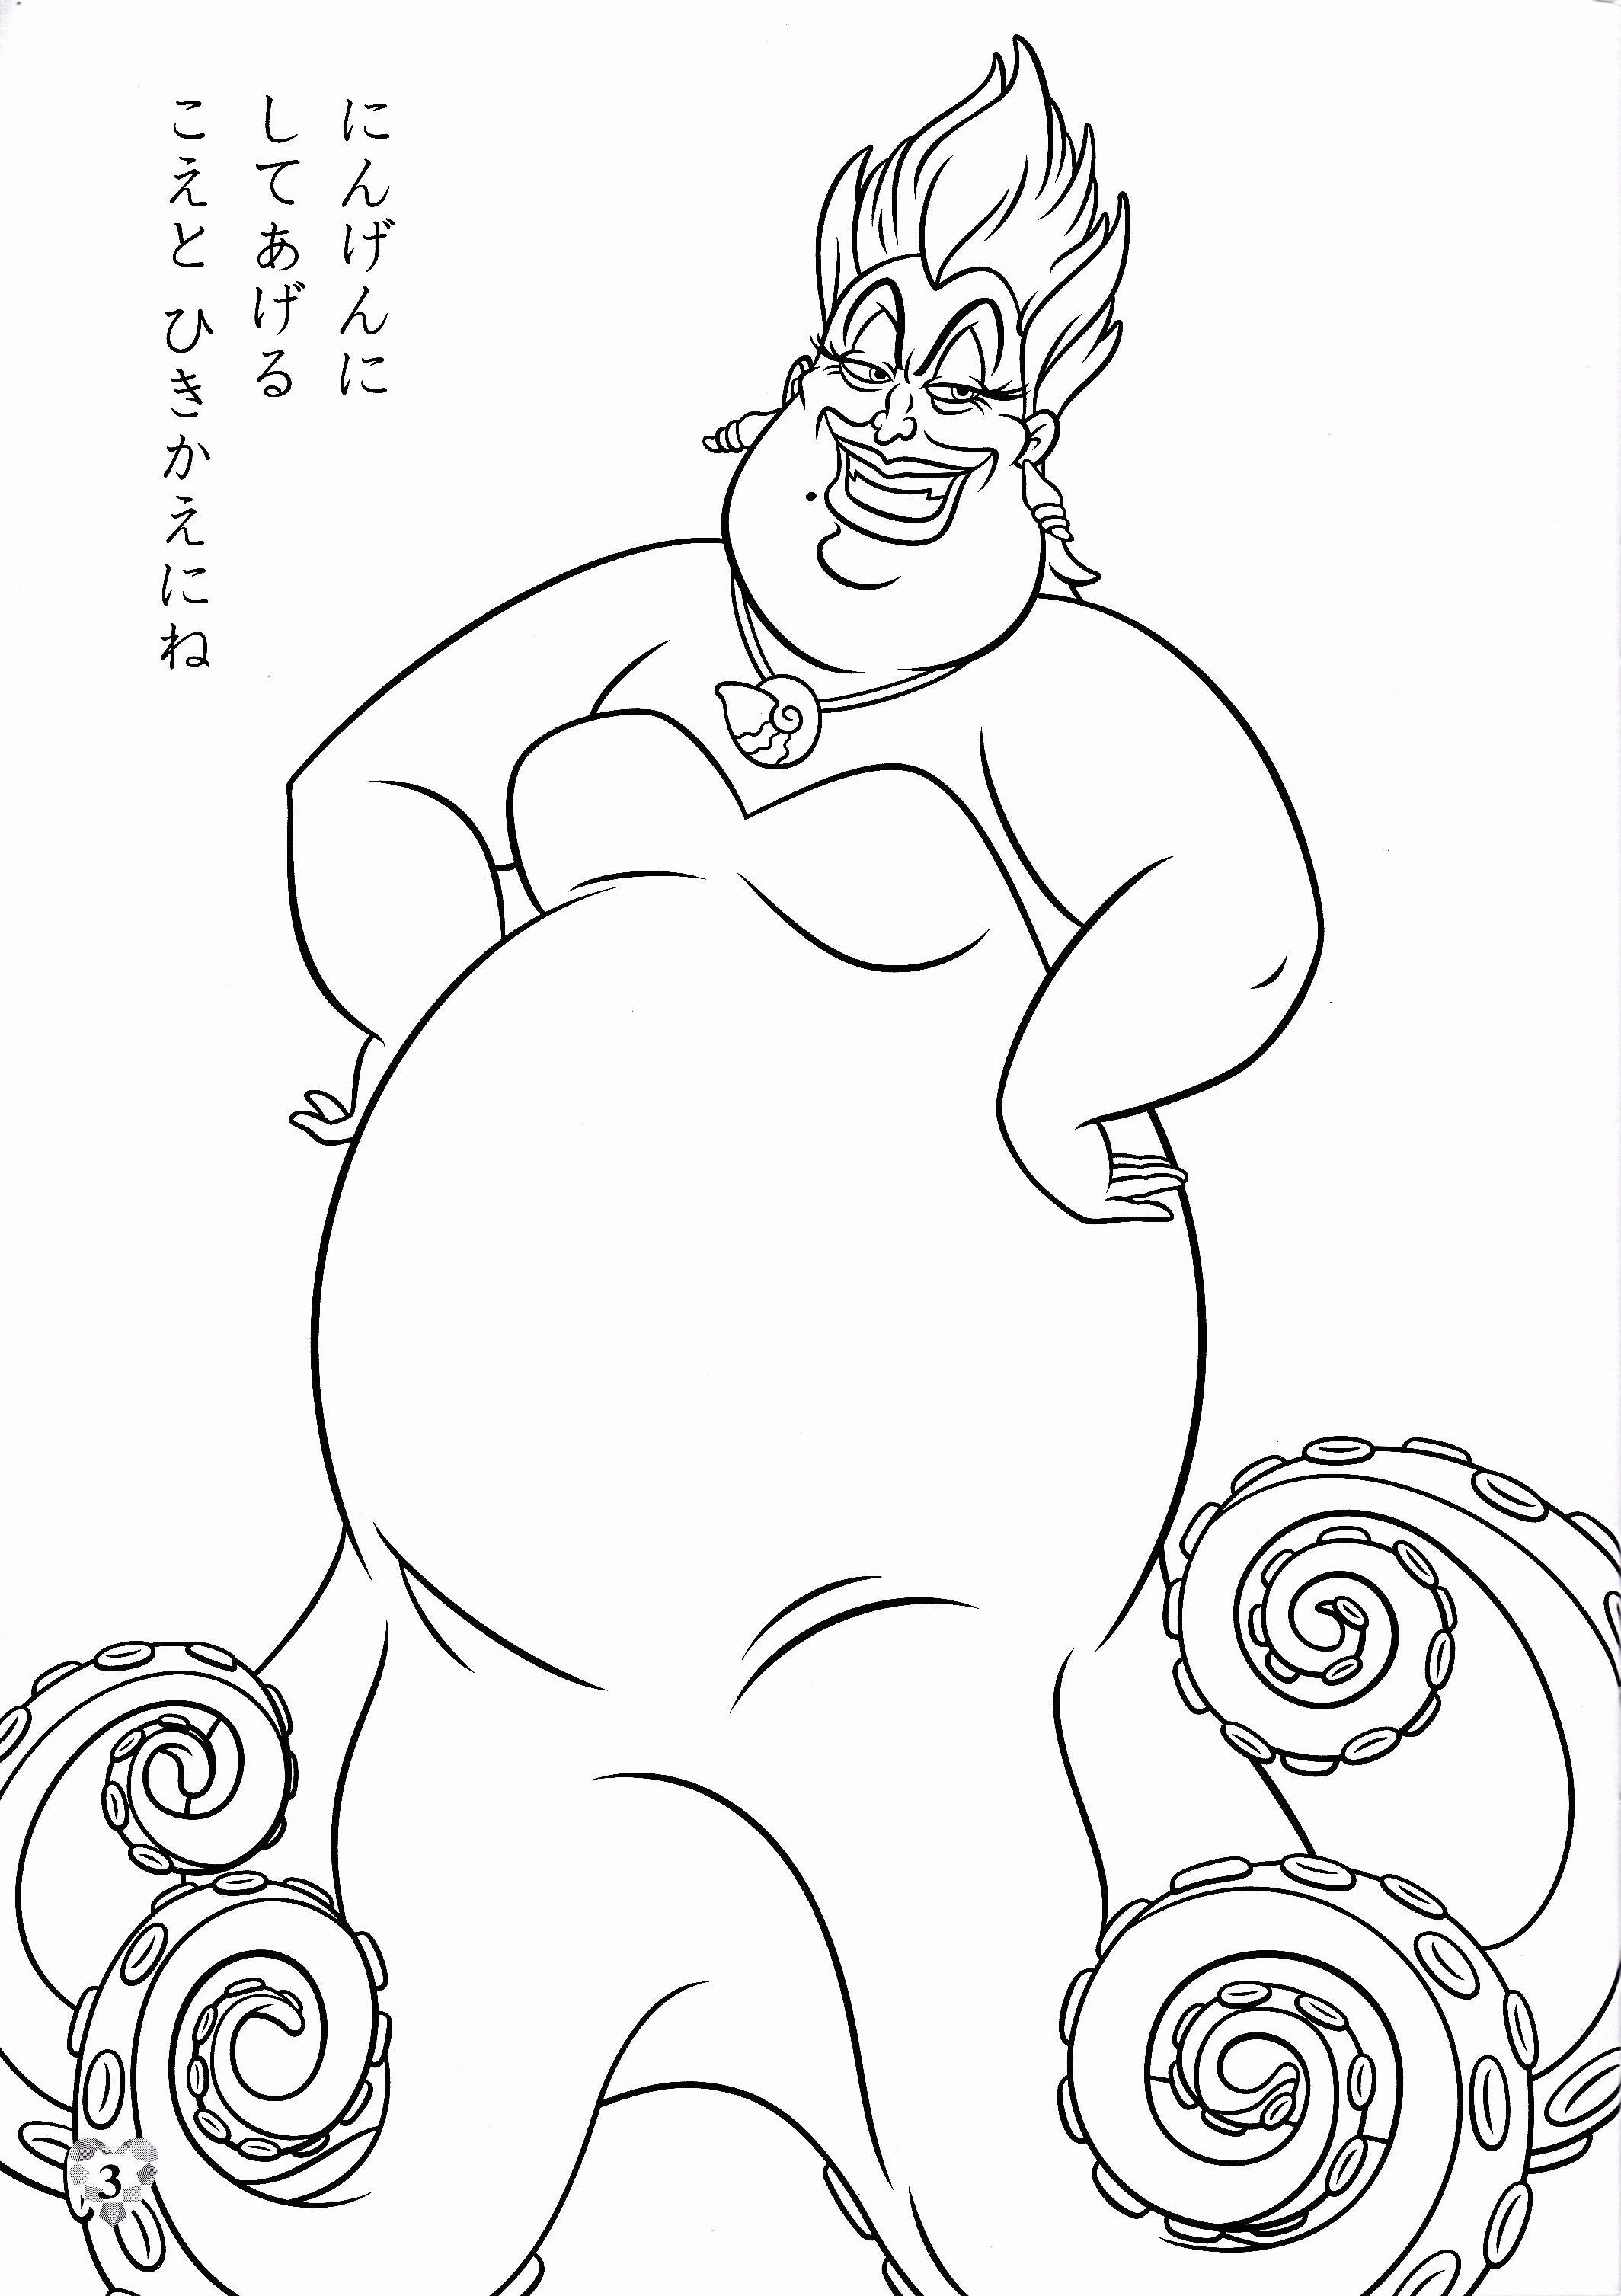 ursula coloring pages ursula coloring pages to download and print for free pages ursula coloring 